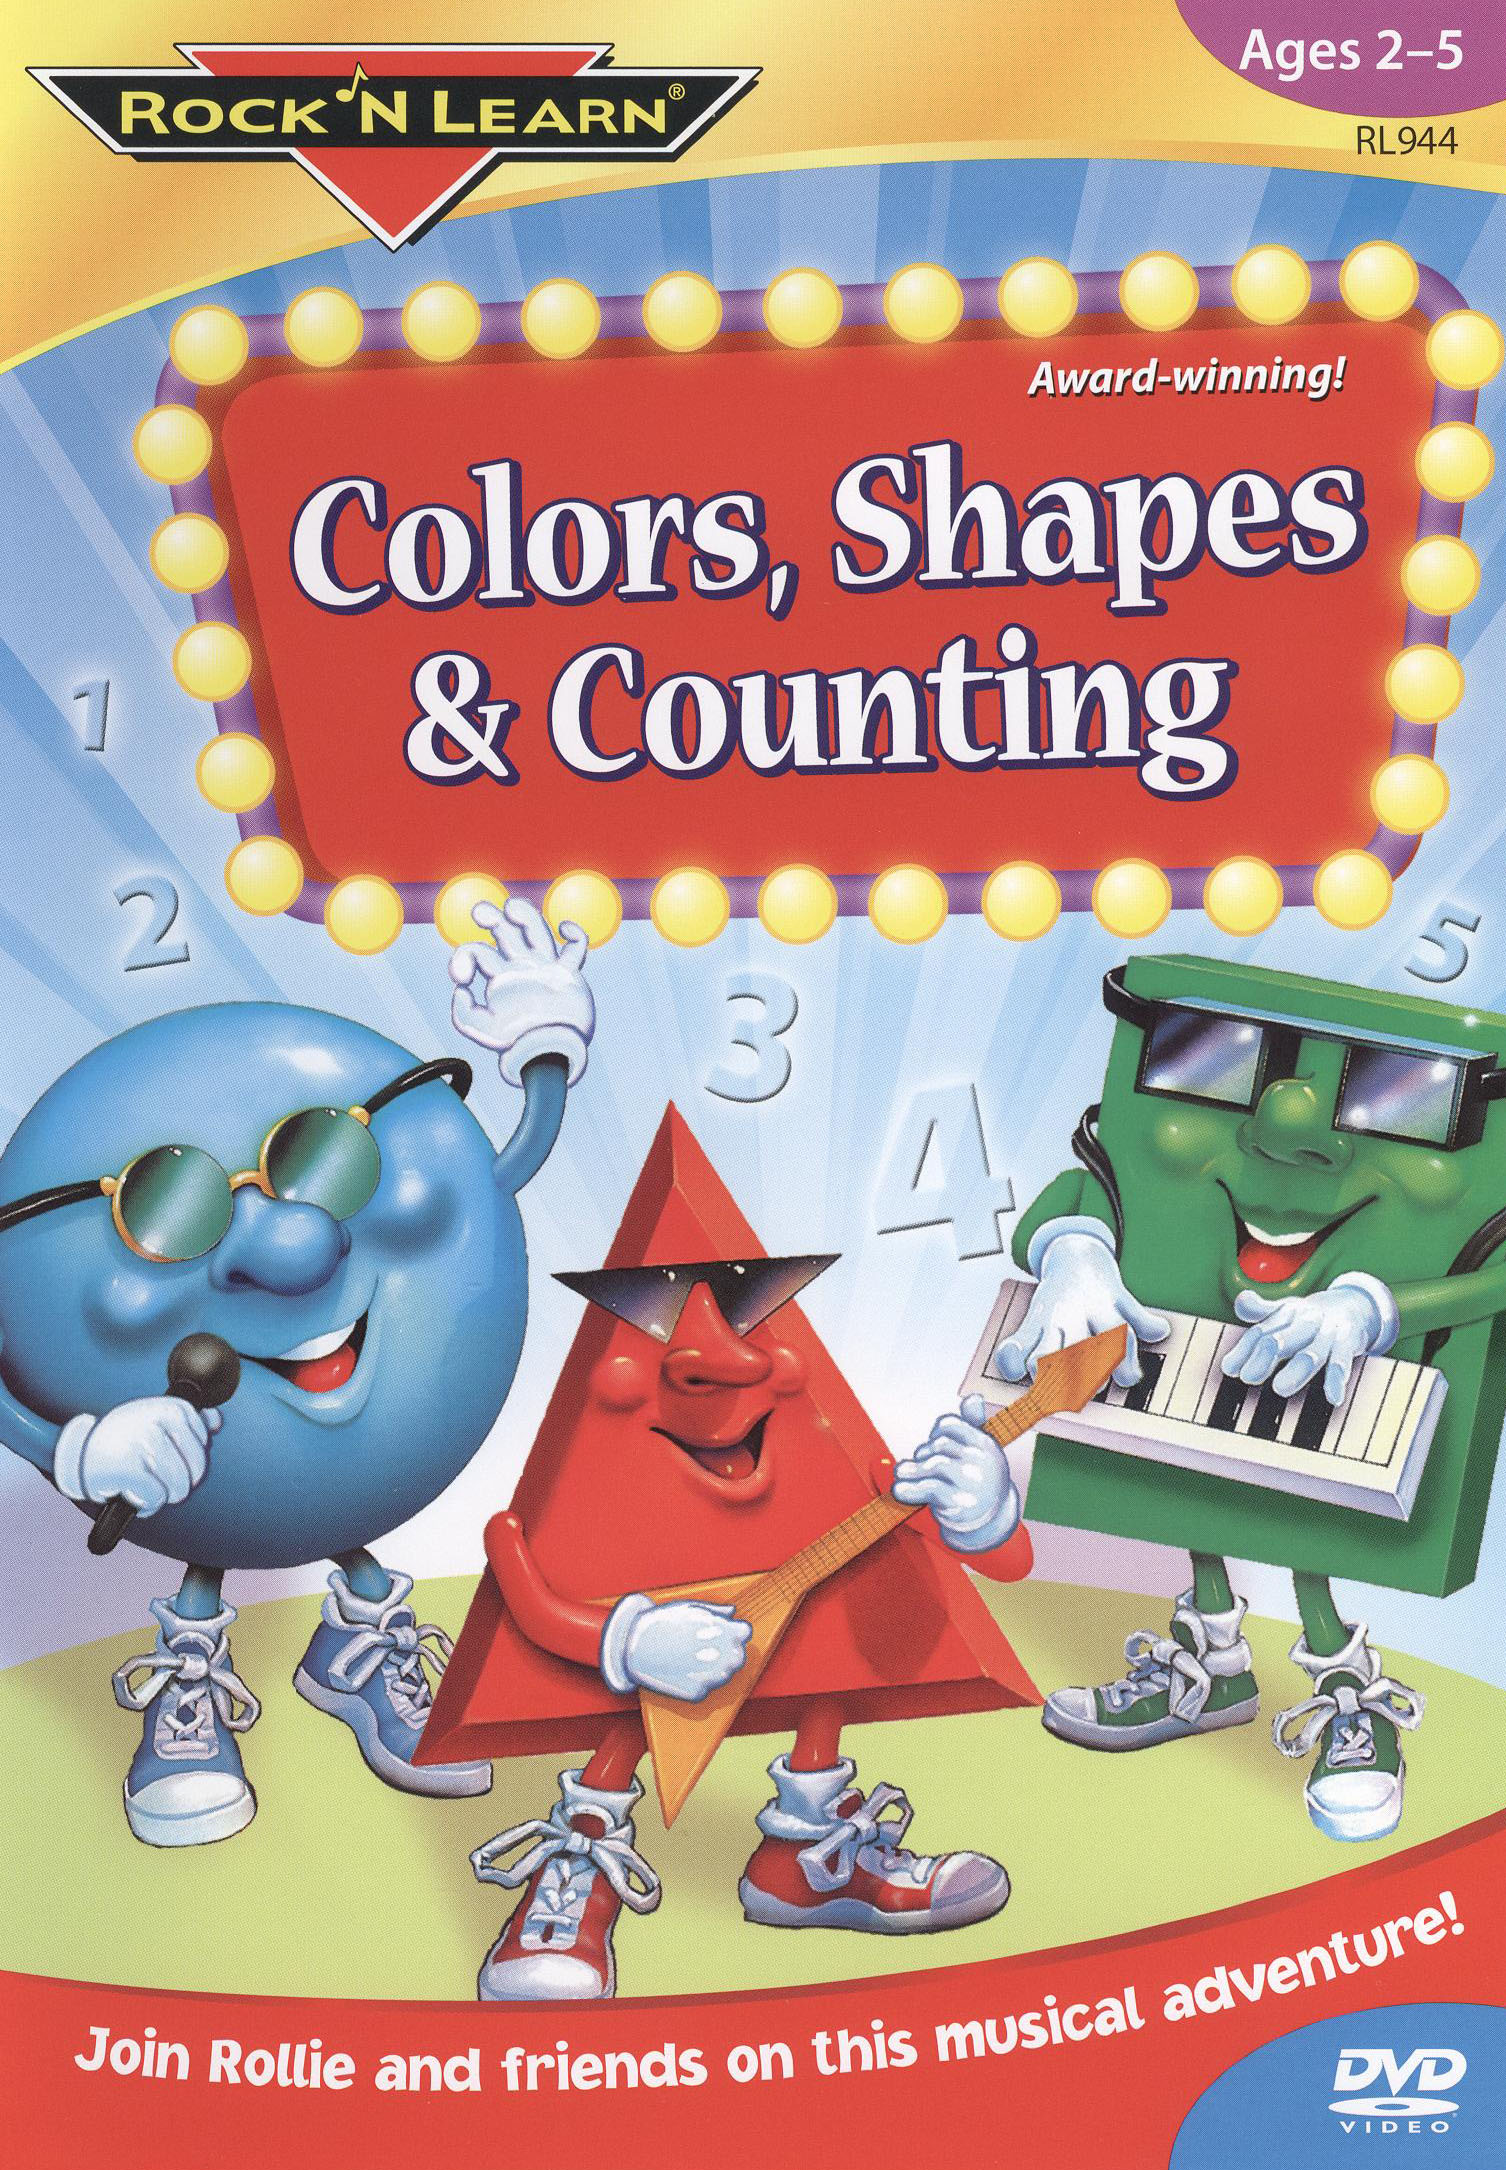 Rock 'N Learn: Colors, Shapes & Counting - | Synopsis, Characteristics